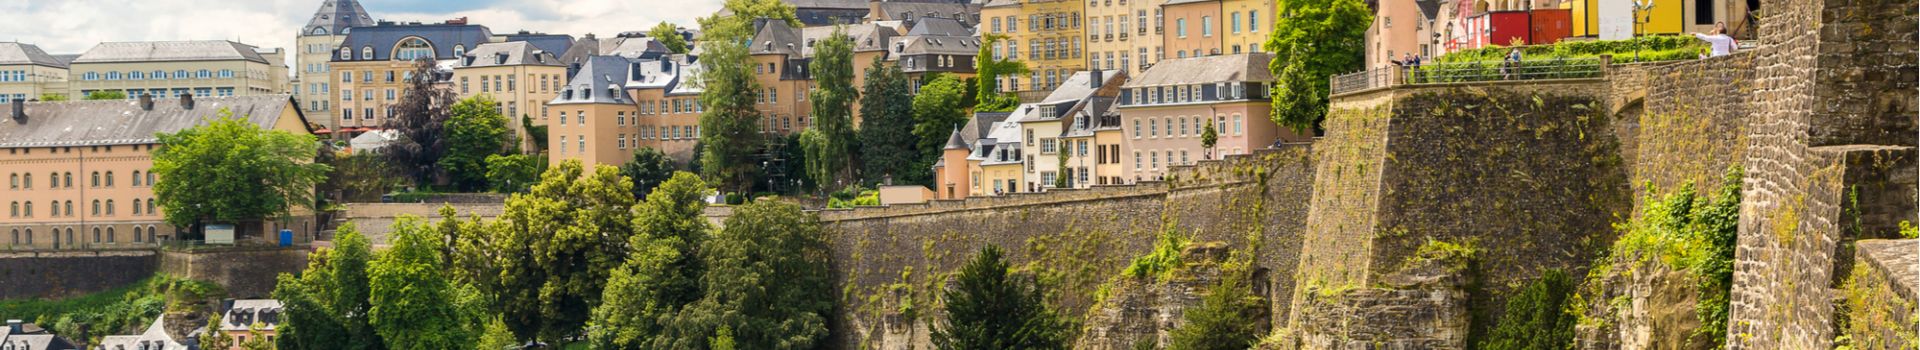 Holidays to Luxembourg | Book Flights & Hotel | Cassidy Travel